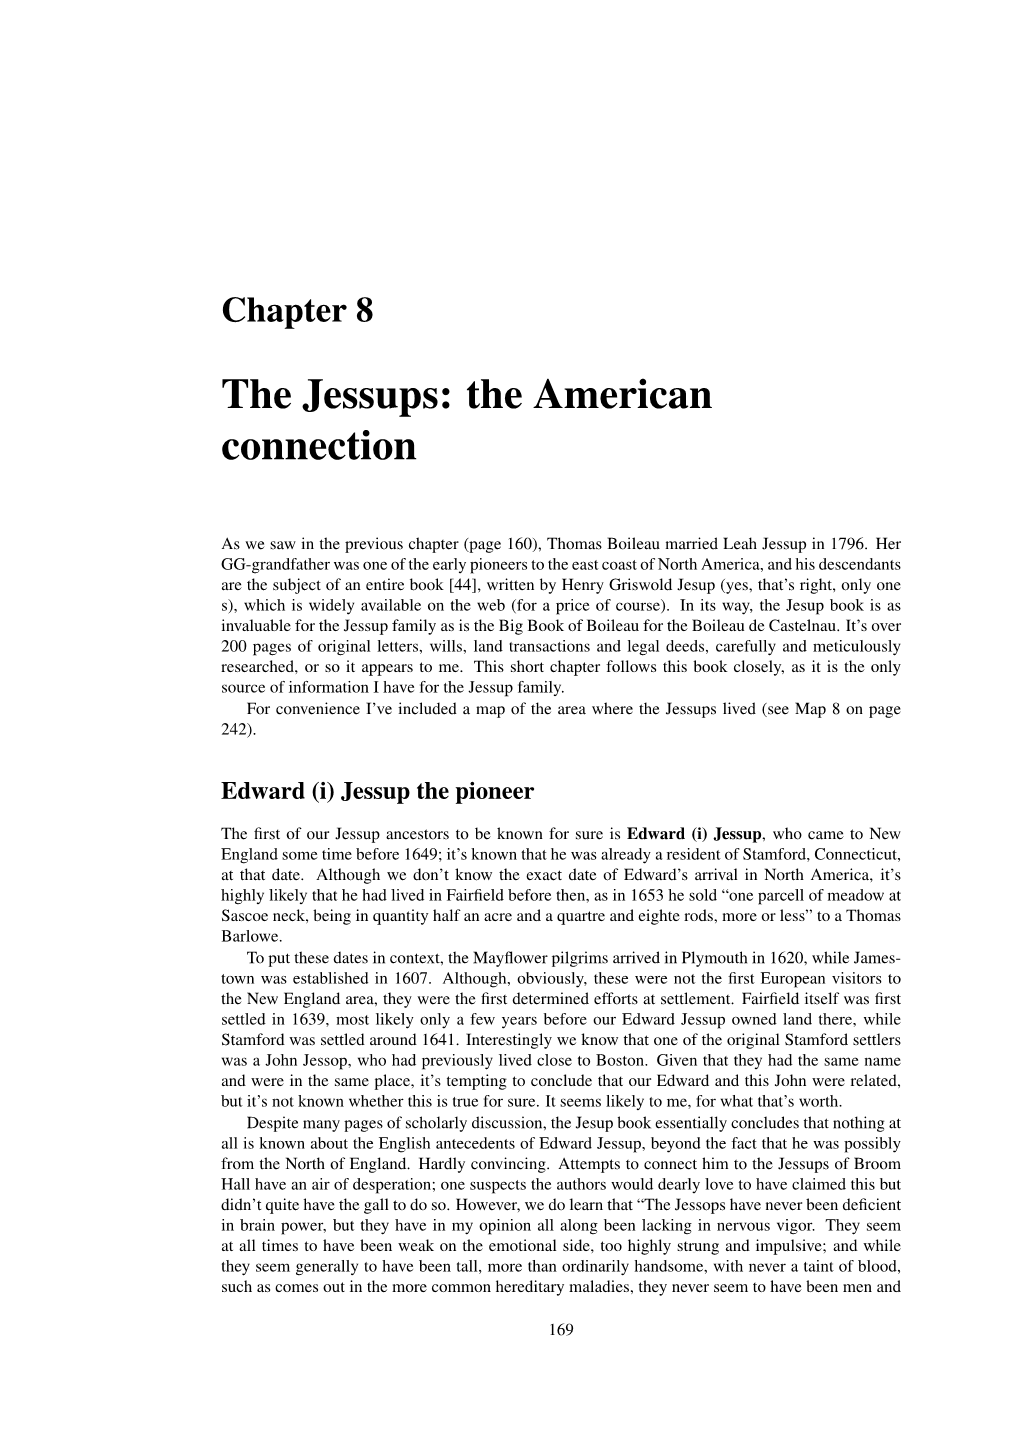 The Jessups: the American Connection